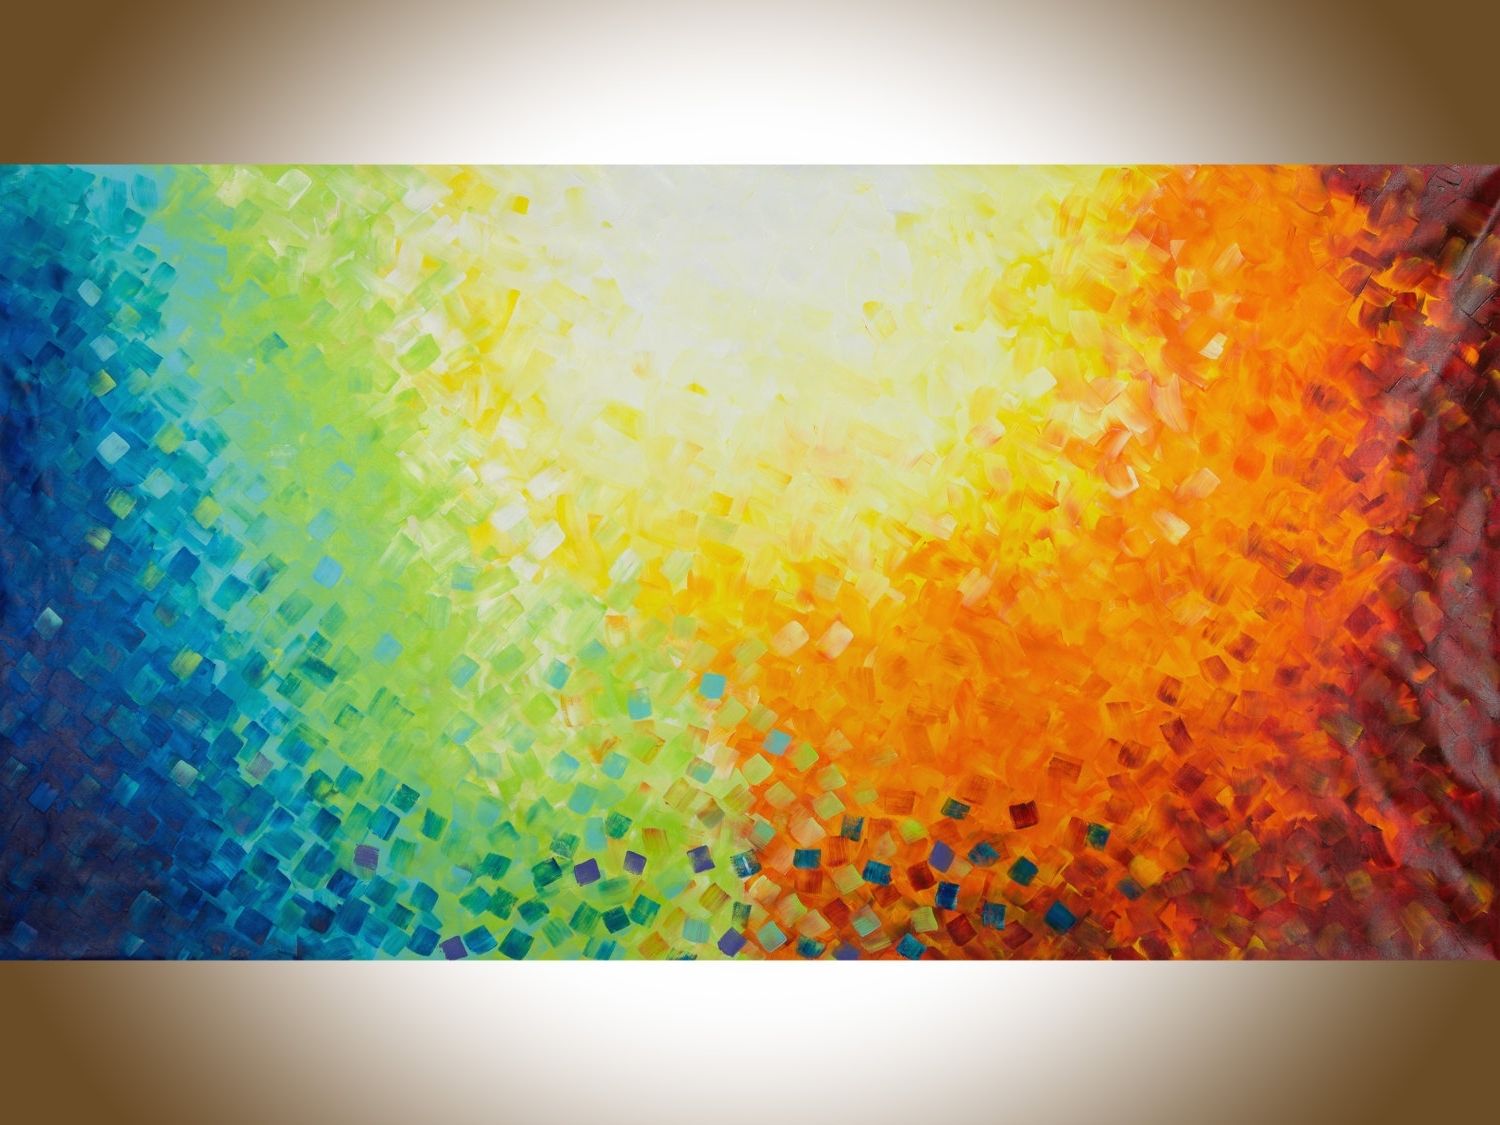 Popular Extra Large Wall Art 60" Red Blue Green Yellow Orange Autumn Intended For Large Yellow Wall Art (View 6 of 15)